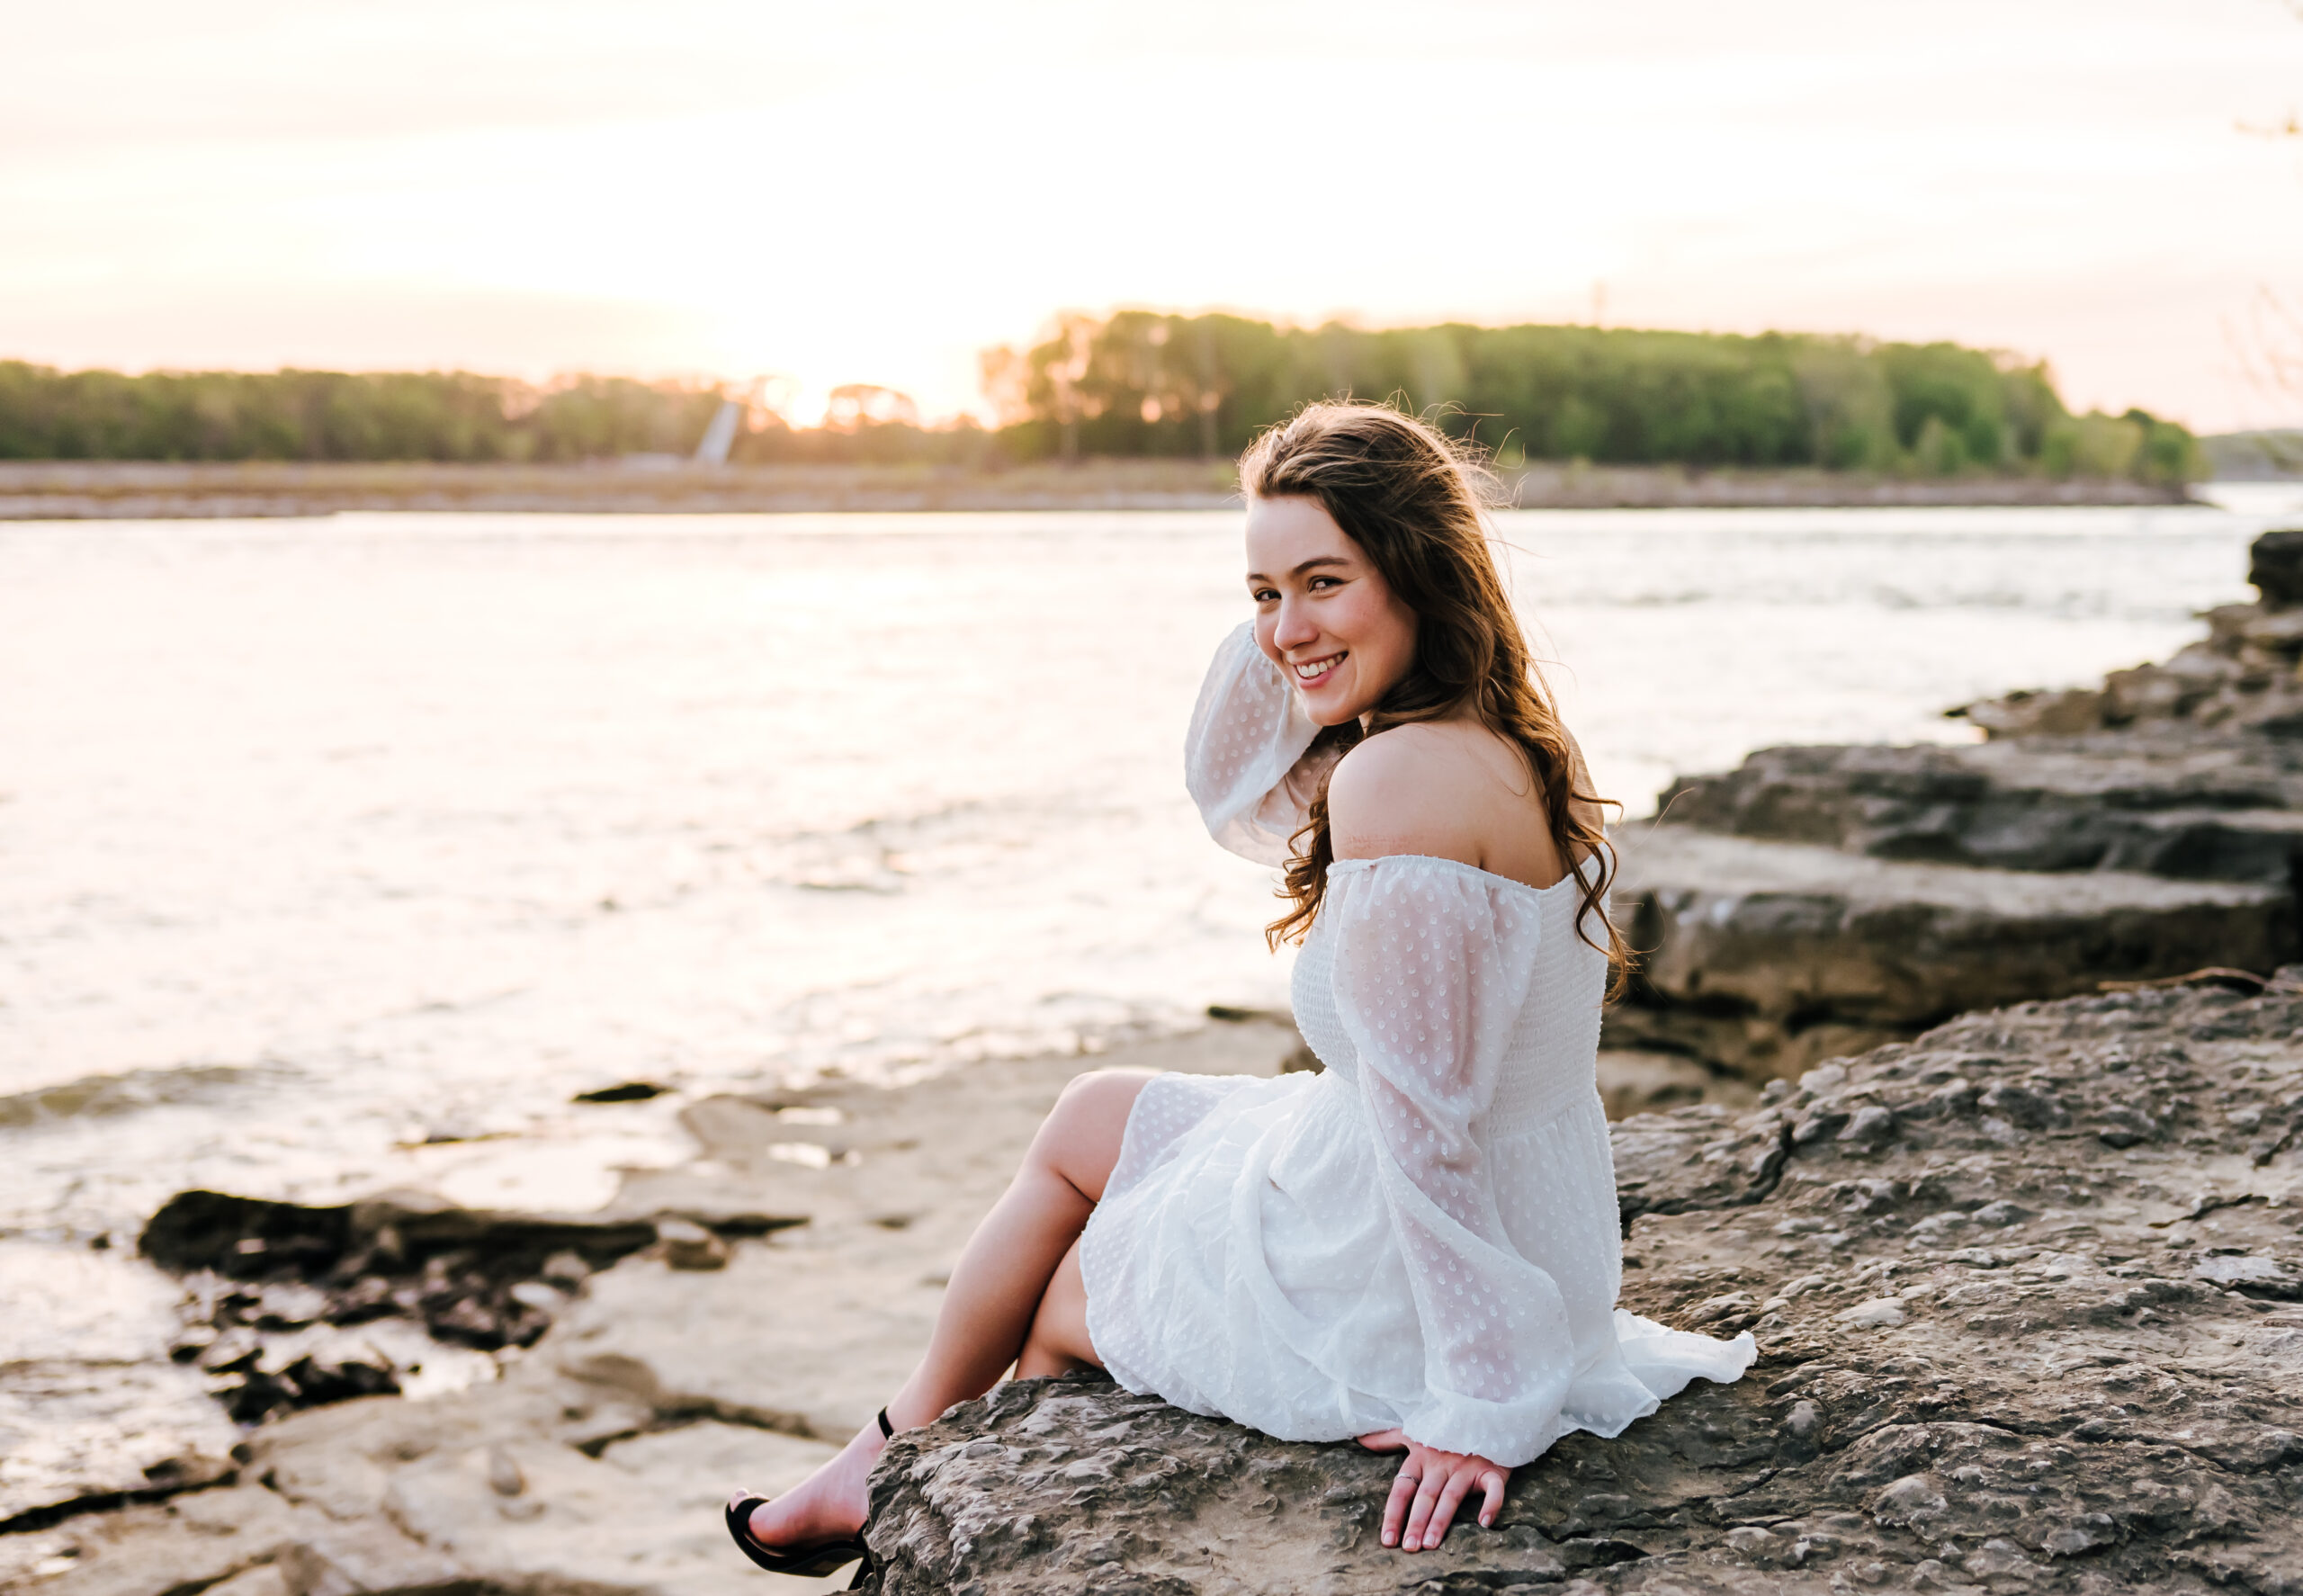 A girl in a white dress smiles, the sun setting behind her, as she sits on a riverside rock overlooking the water.